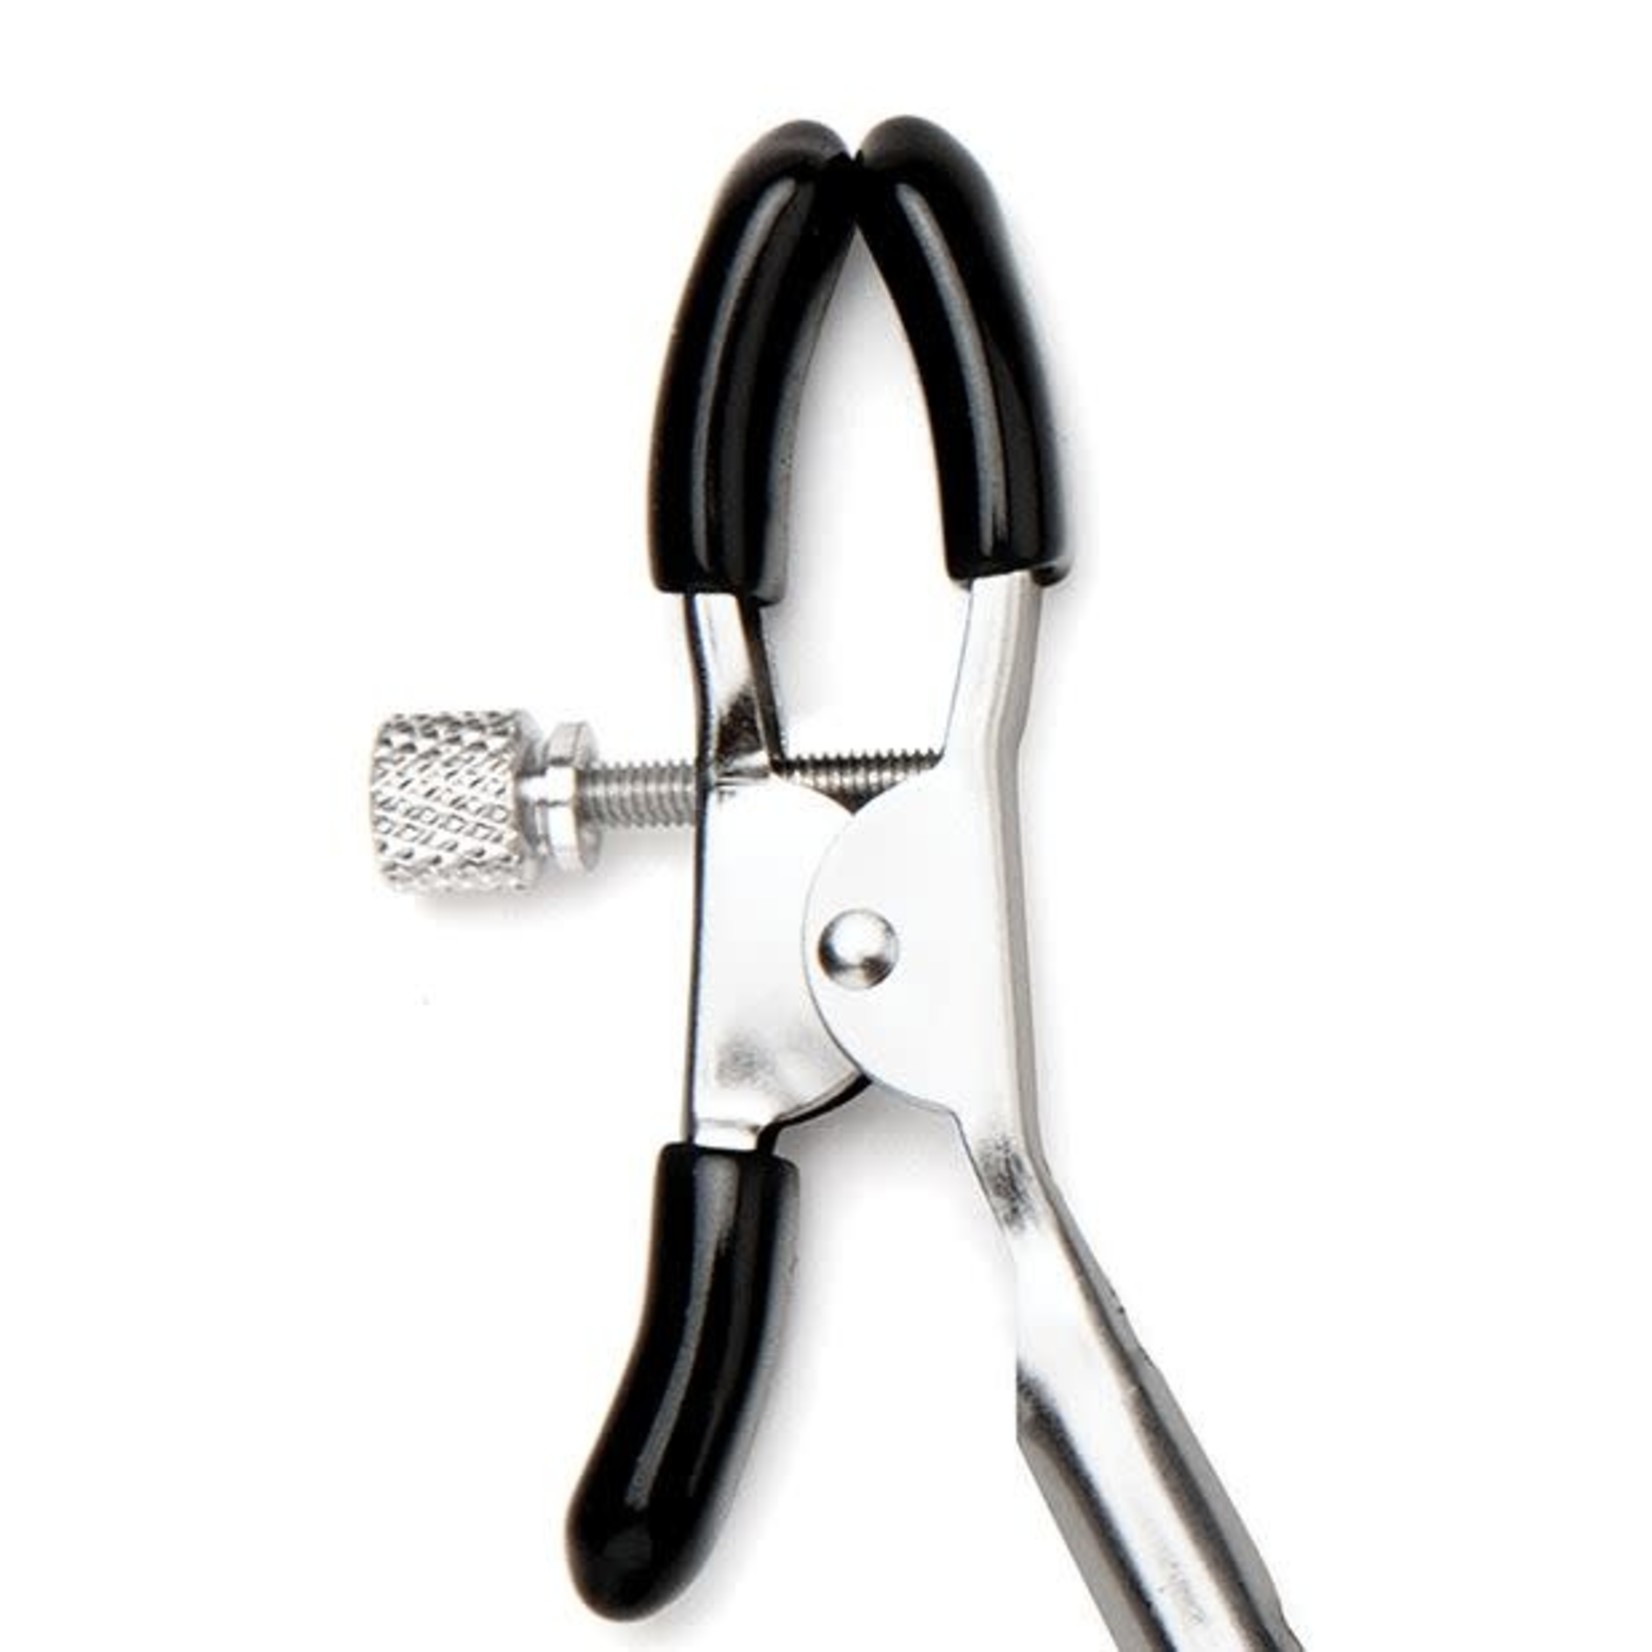 ADJUSTABLE NIPPLE TO CLIT CLAMPS